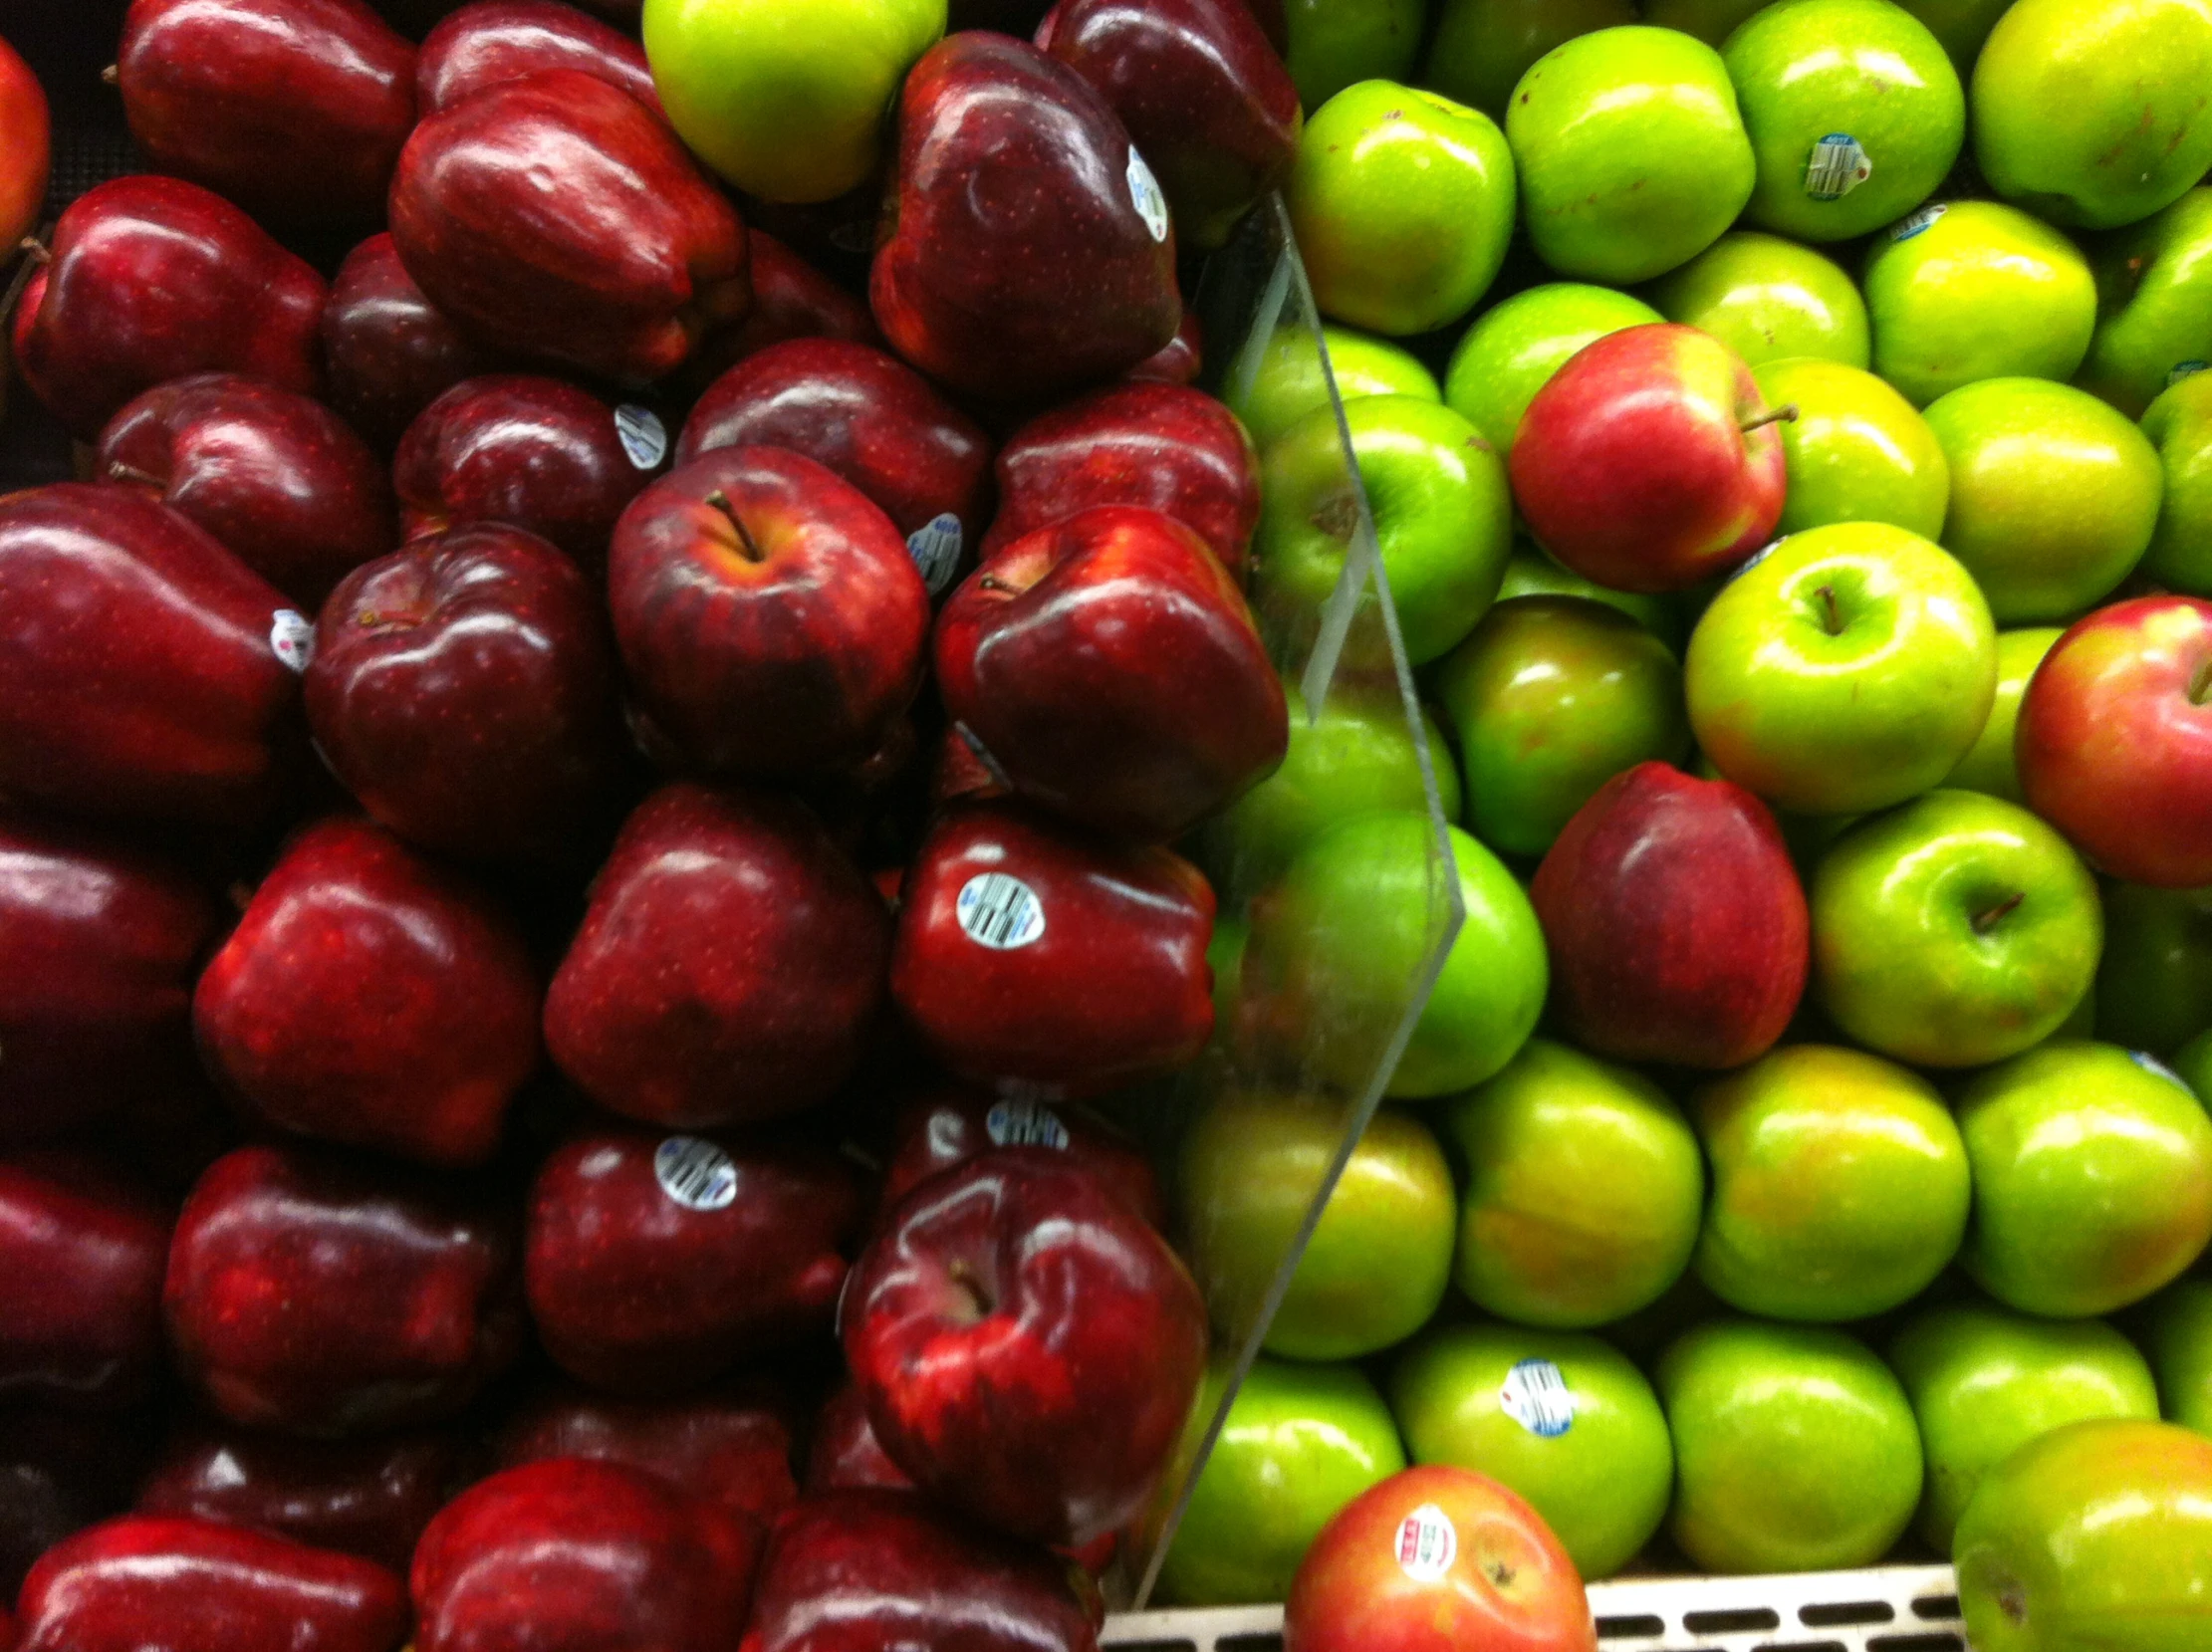 an assortment of colorful apples at a grocery store